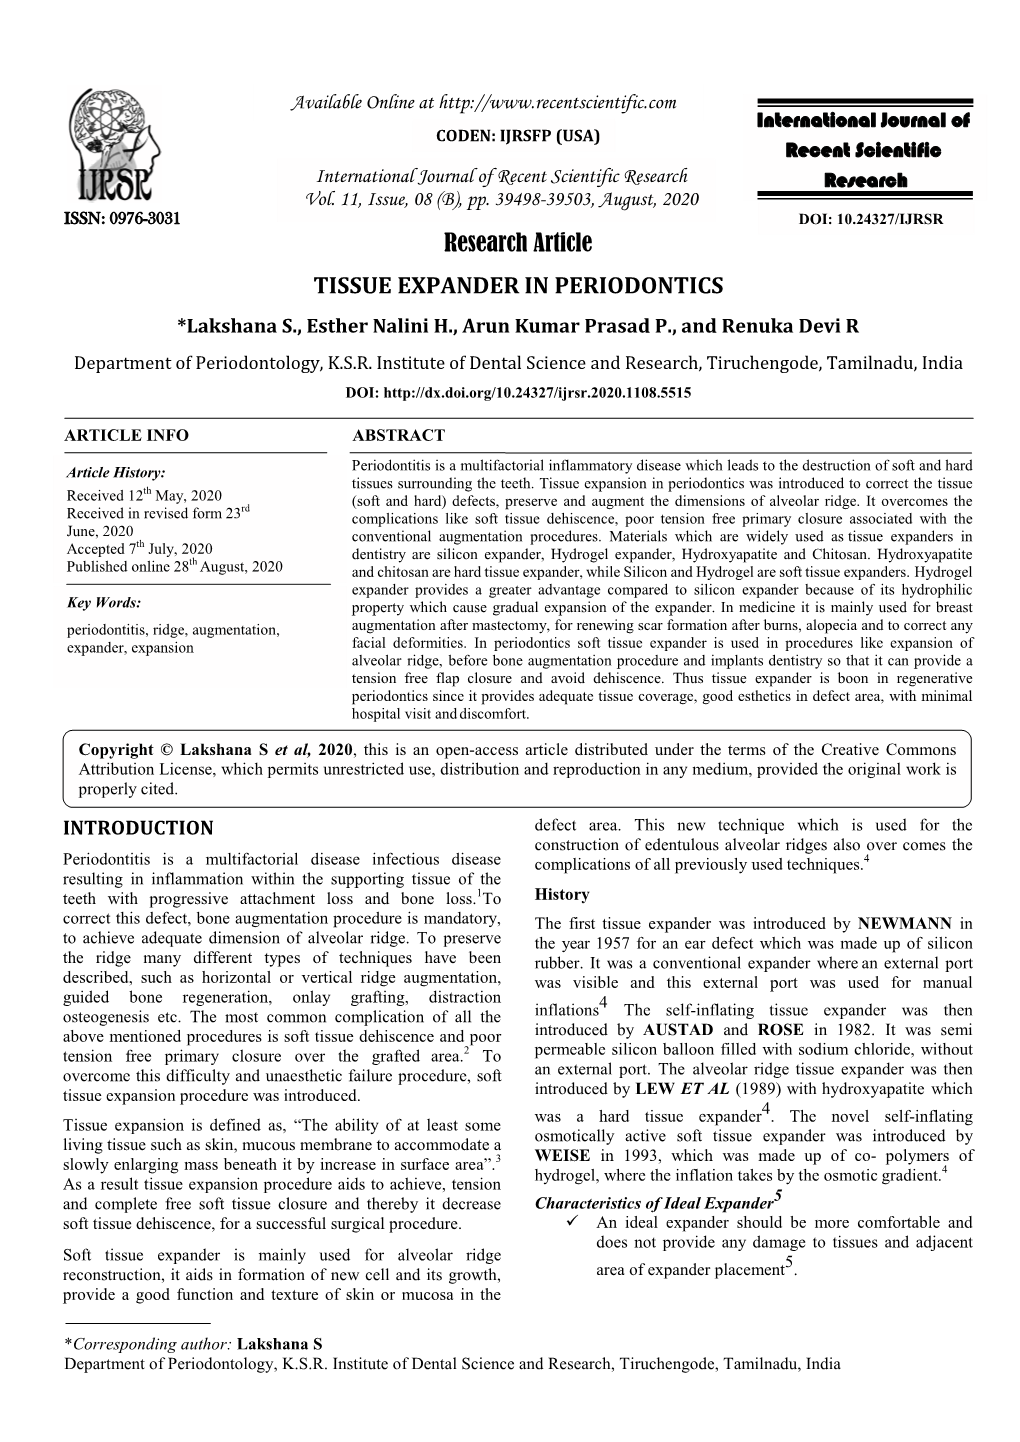 Research Article TISSUE EXPANDER in PERIODONTICS